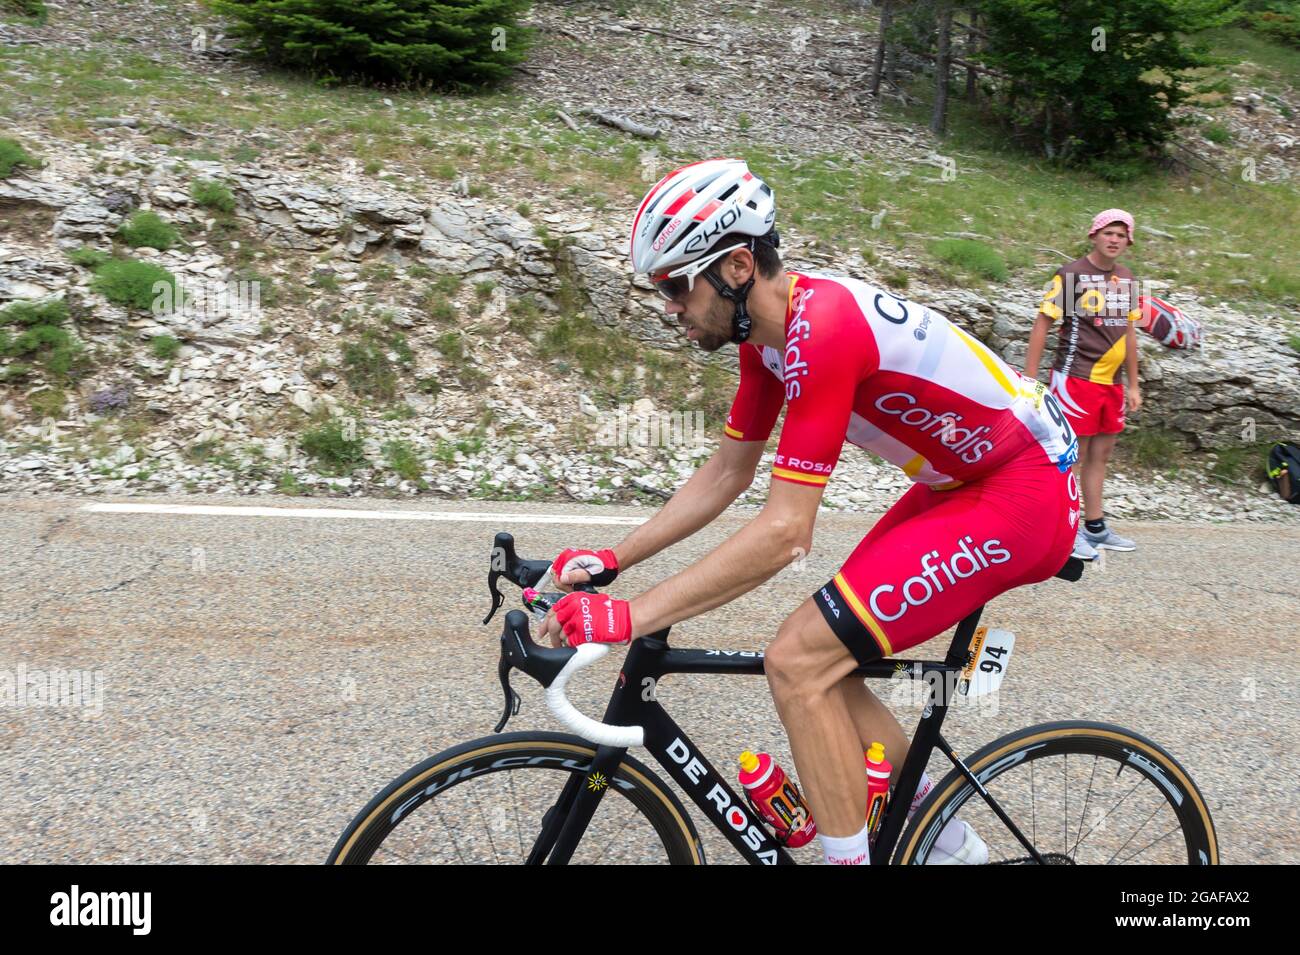 Jesus Herrada (team Cofidis) in action during the 11th stage of 2021 Tour de France.The 11th stage of the Tour de France 2021 takes place between Sorgues and Malaucene and includes two ascents of Mont-Ventoux . The winner of the stage is Wout van Aert (Jumbo Visma team) and the final winner of the general classification of the 2021 Tour de France is the Slovenian rider of the UAE Team Emirates Tadej Pogacar. Stock Photo